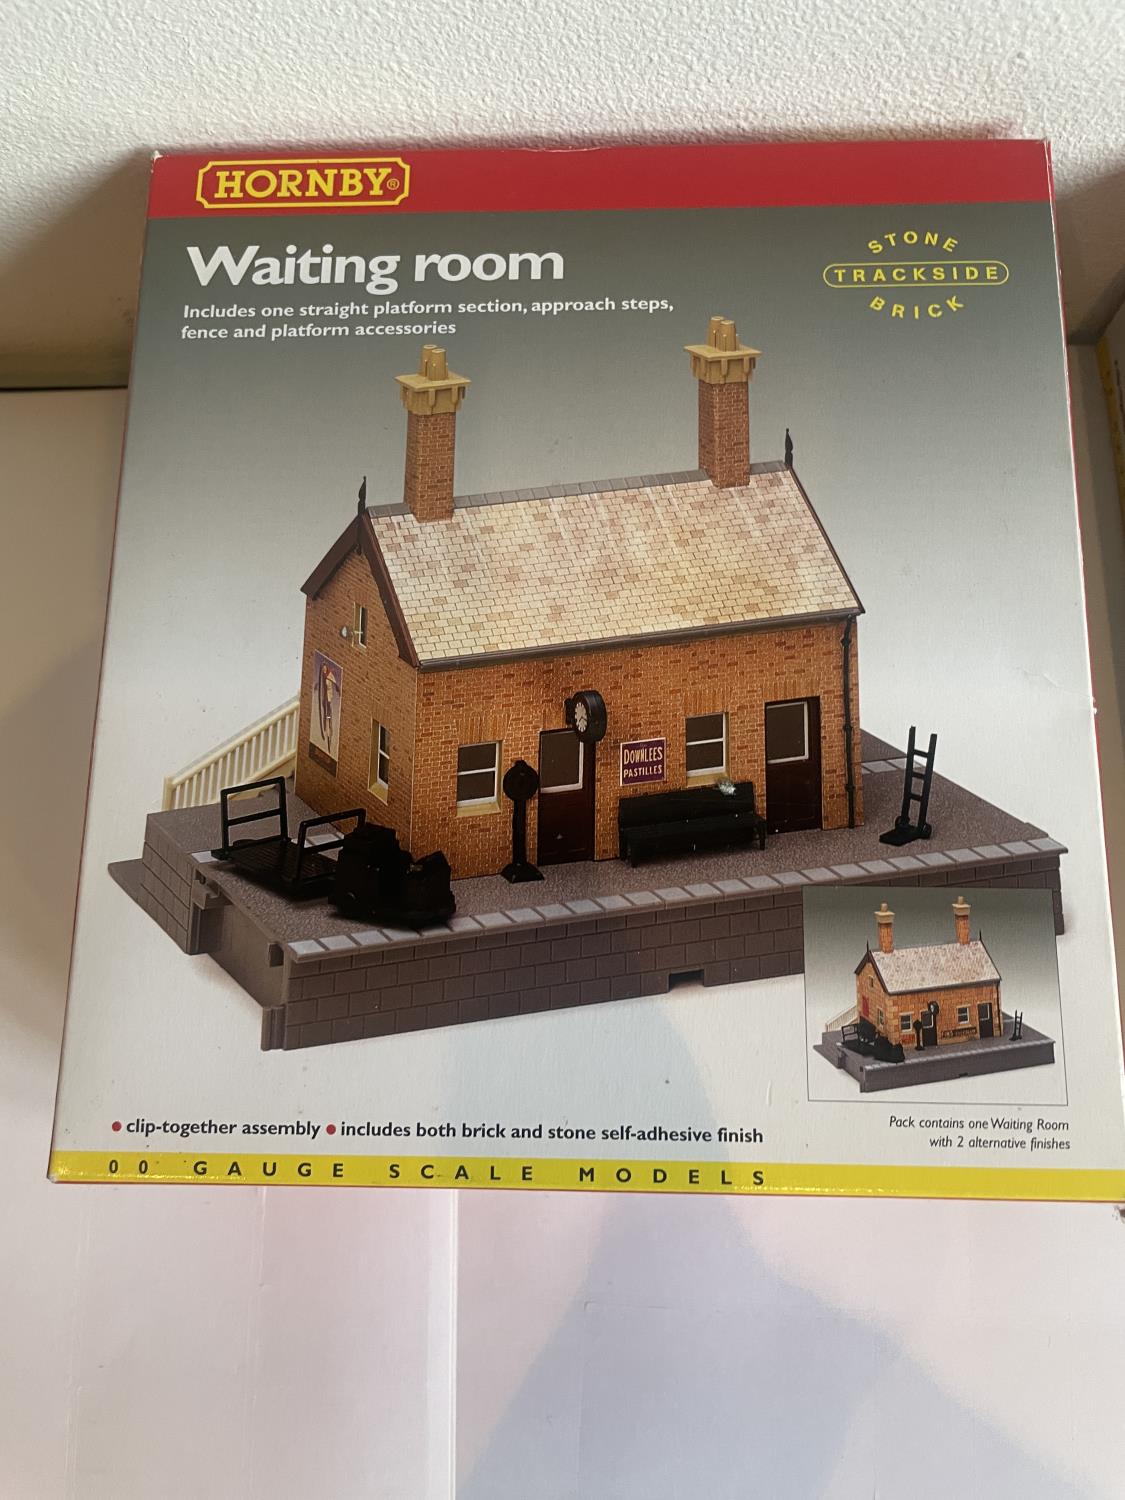 TWO AS NEW AND BOXED HORNBY 00 GAUGE RAILWAY MODELS TO INCLUDE A BOOKING HALLA AND A WAITING ROOM - Bild 2 aus 3